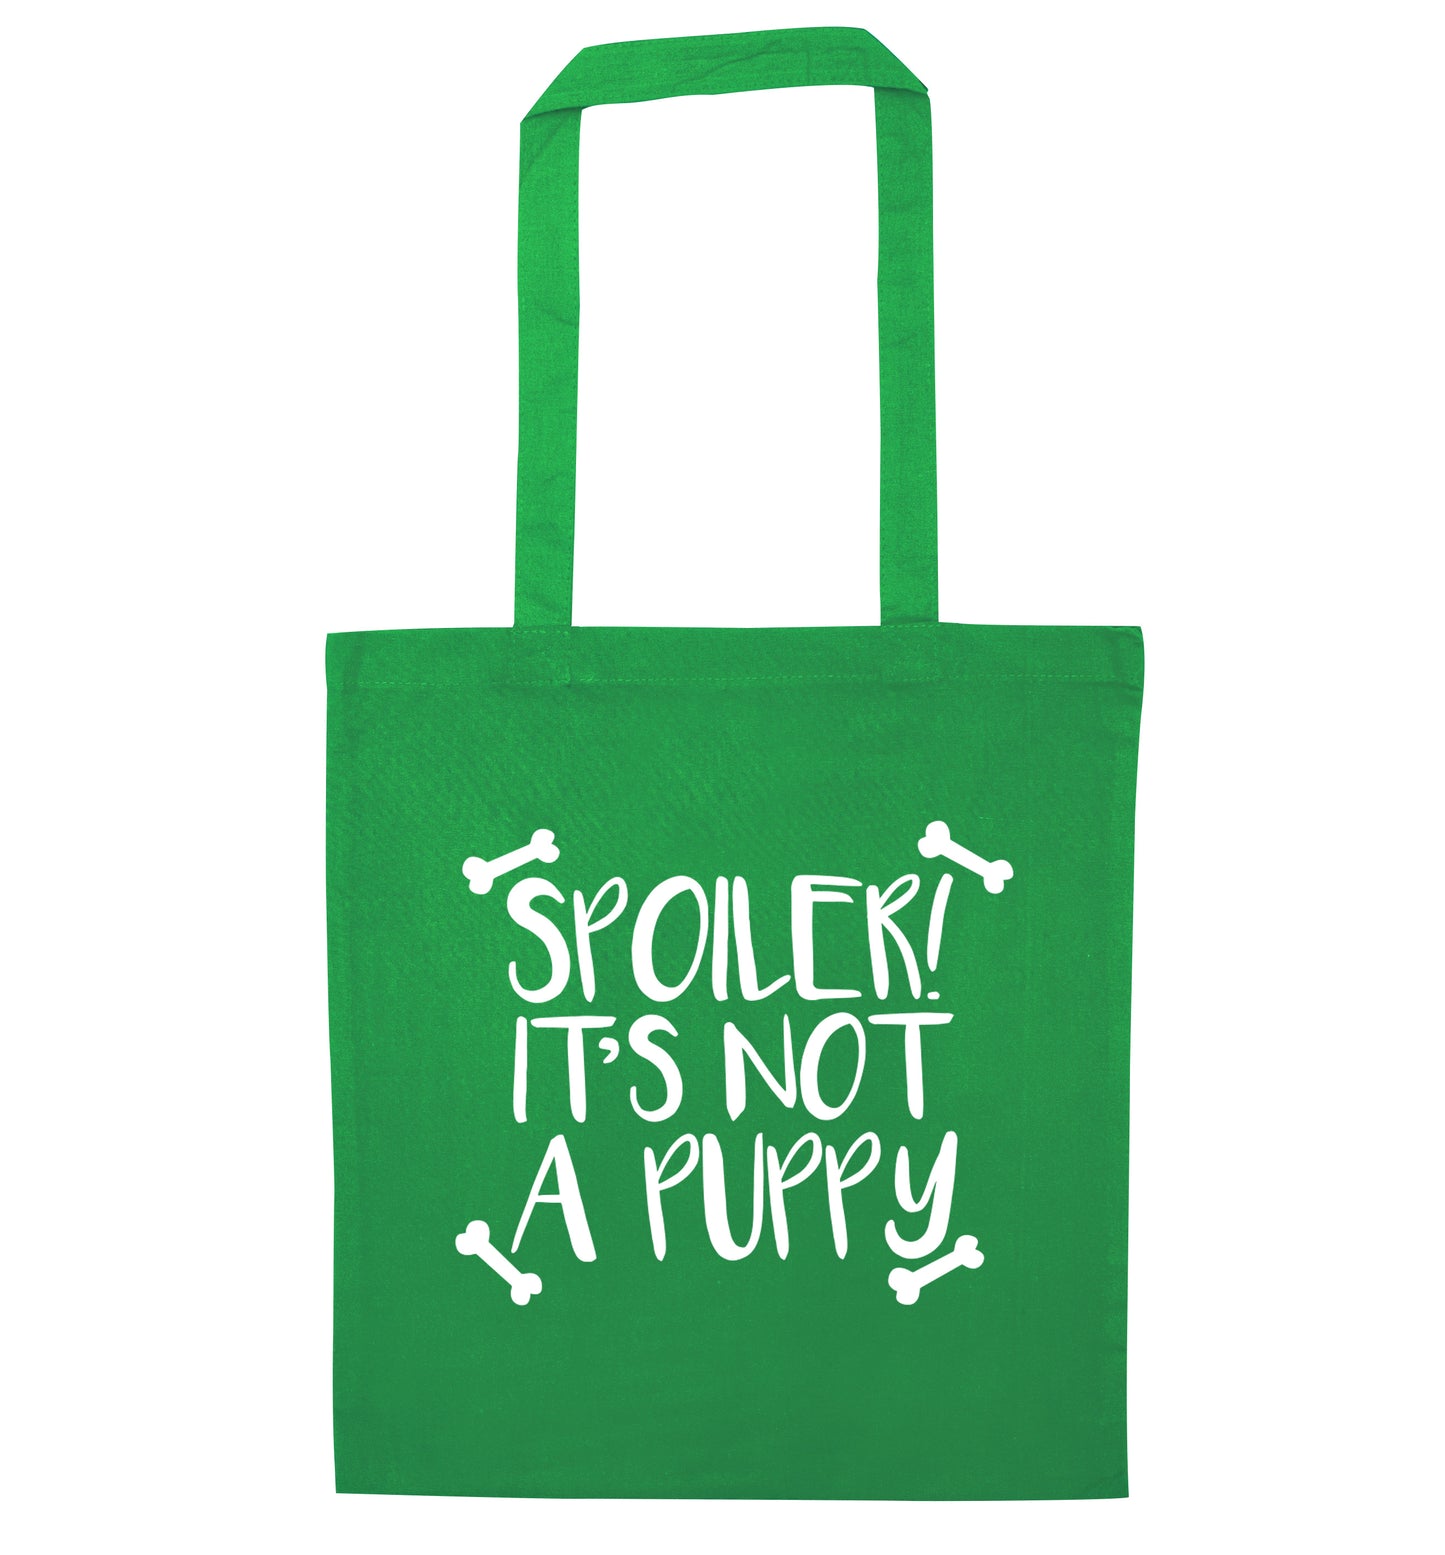 Spoiler it's not a puppy green tote bag